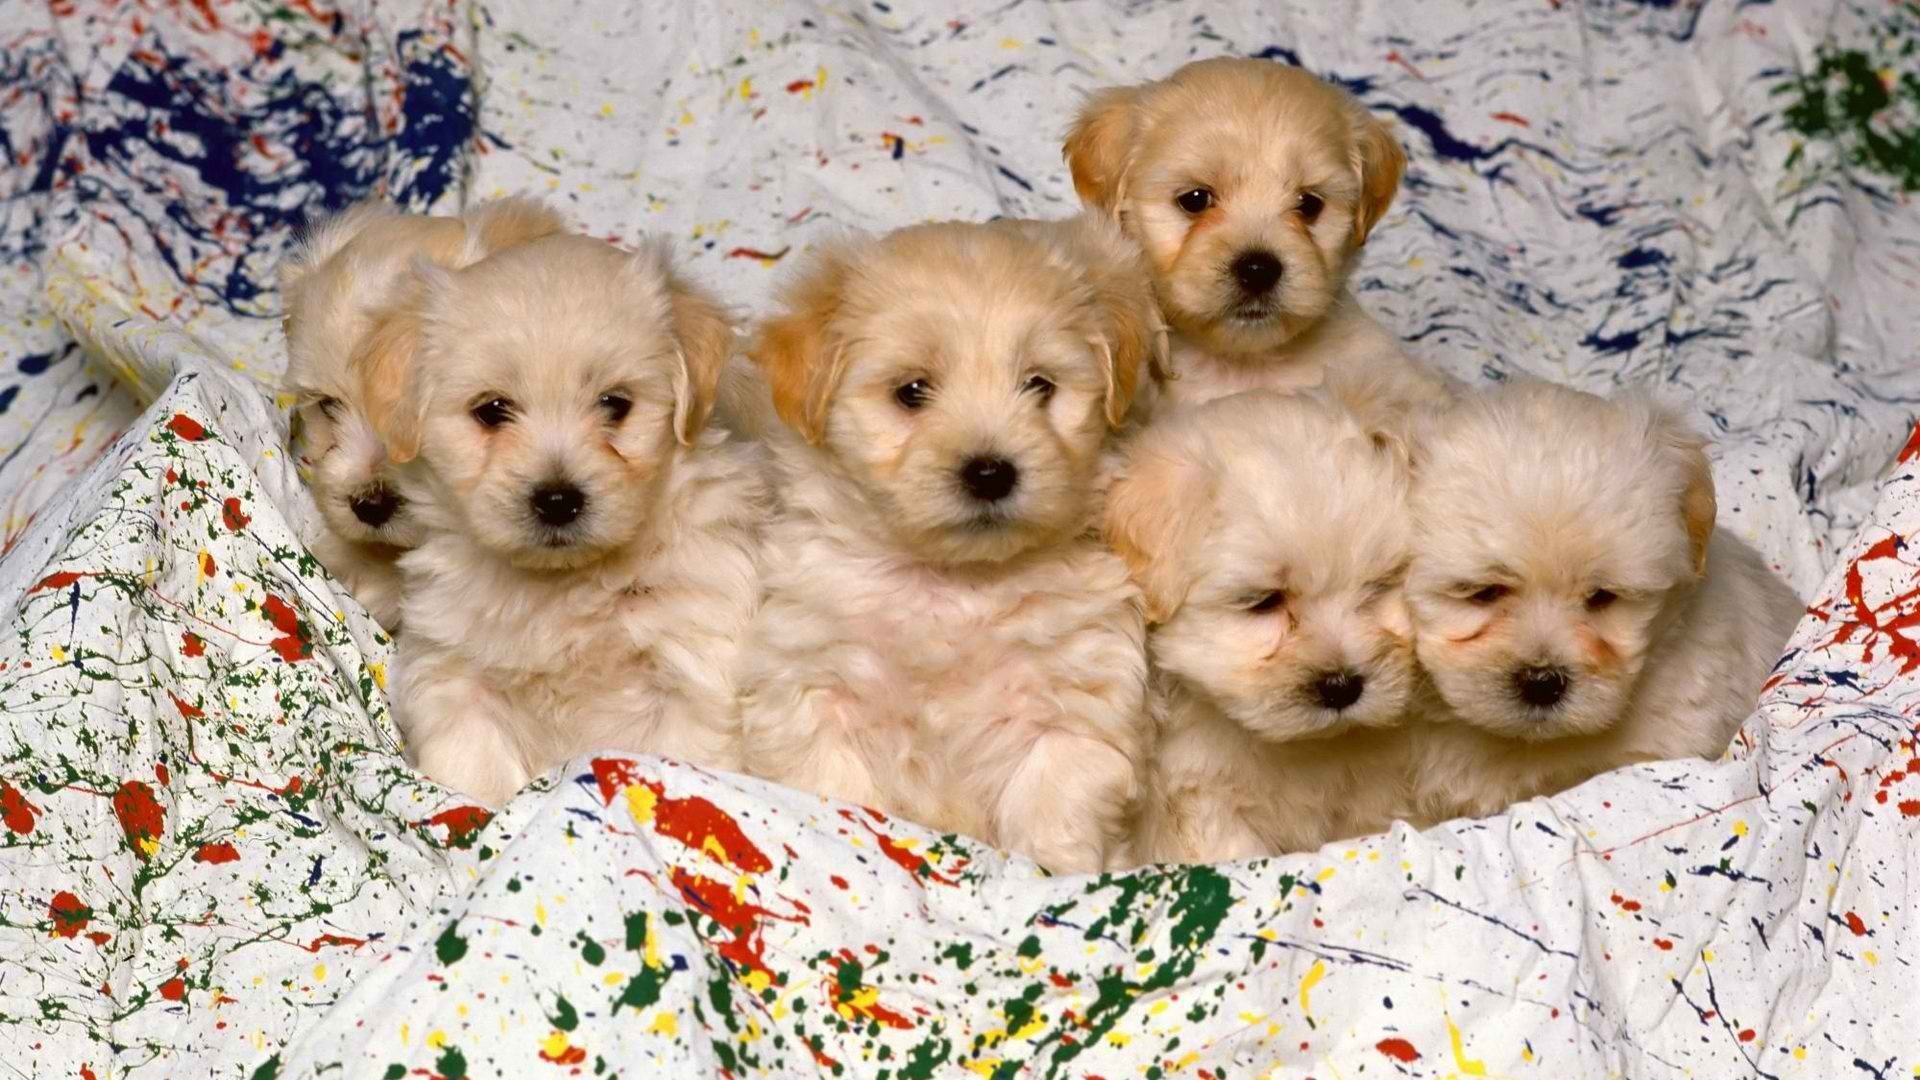 Download 1080p Puppy PC wallpaper ID:46697 for free